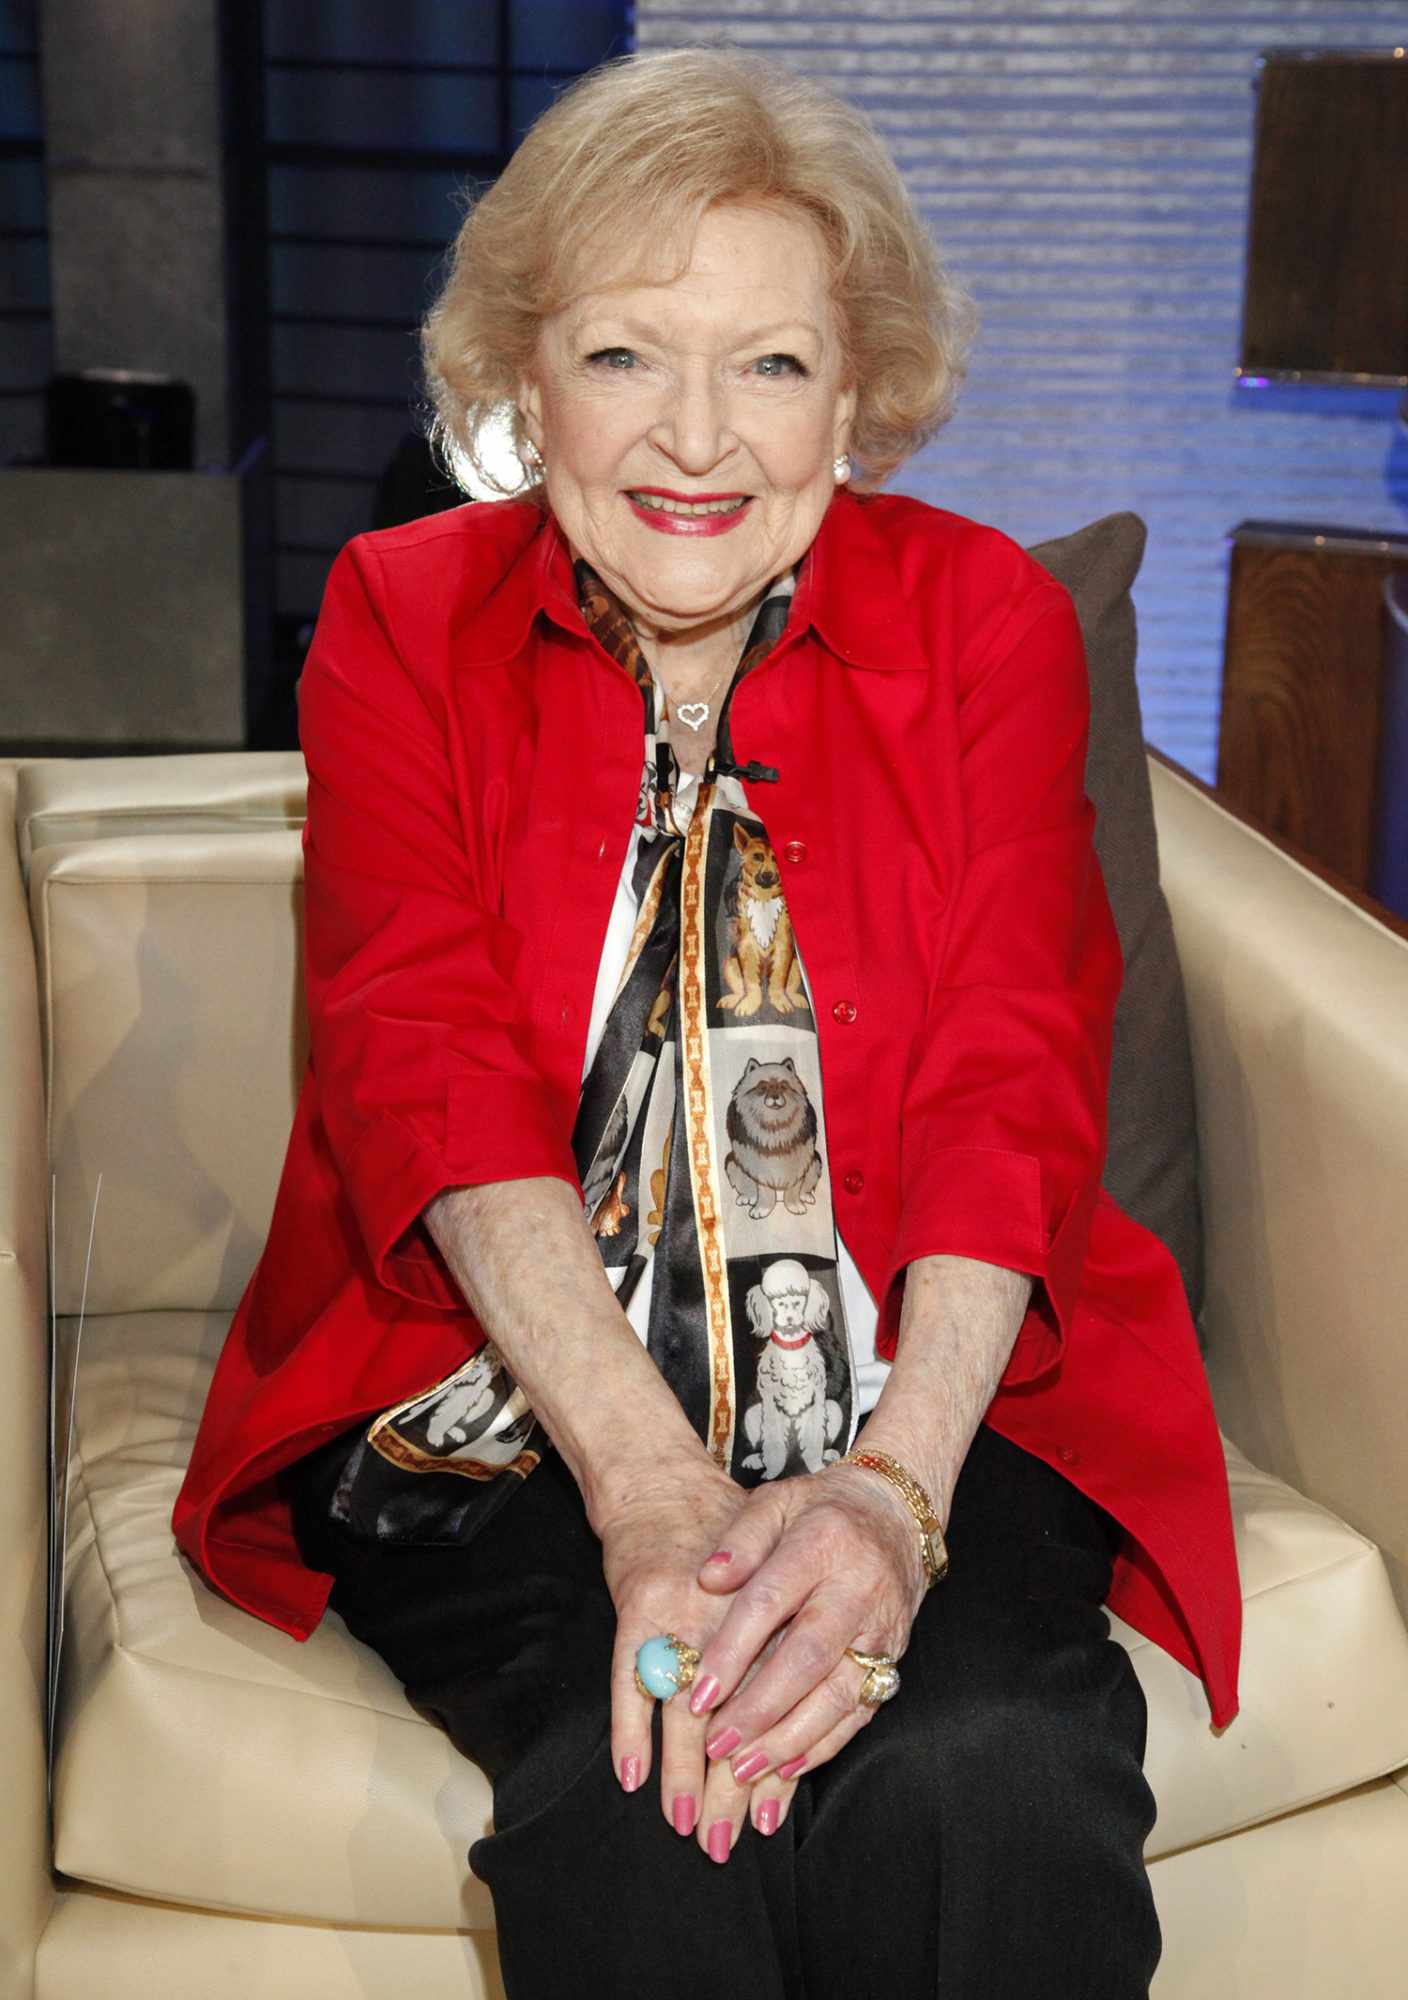 Hollywood mourns death of Betty White: “What an exceptional life”